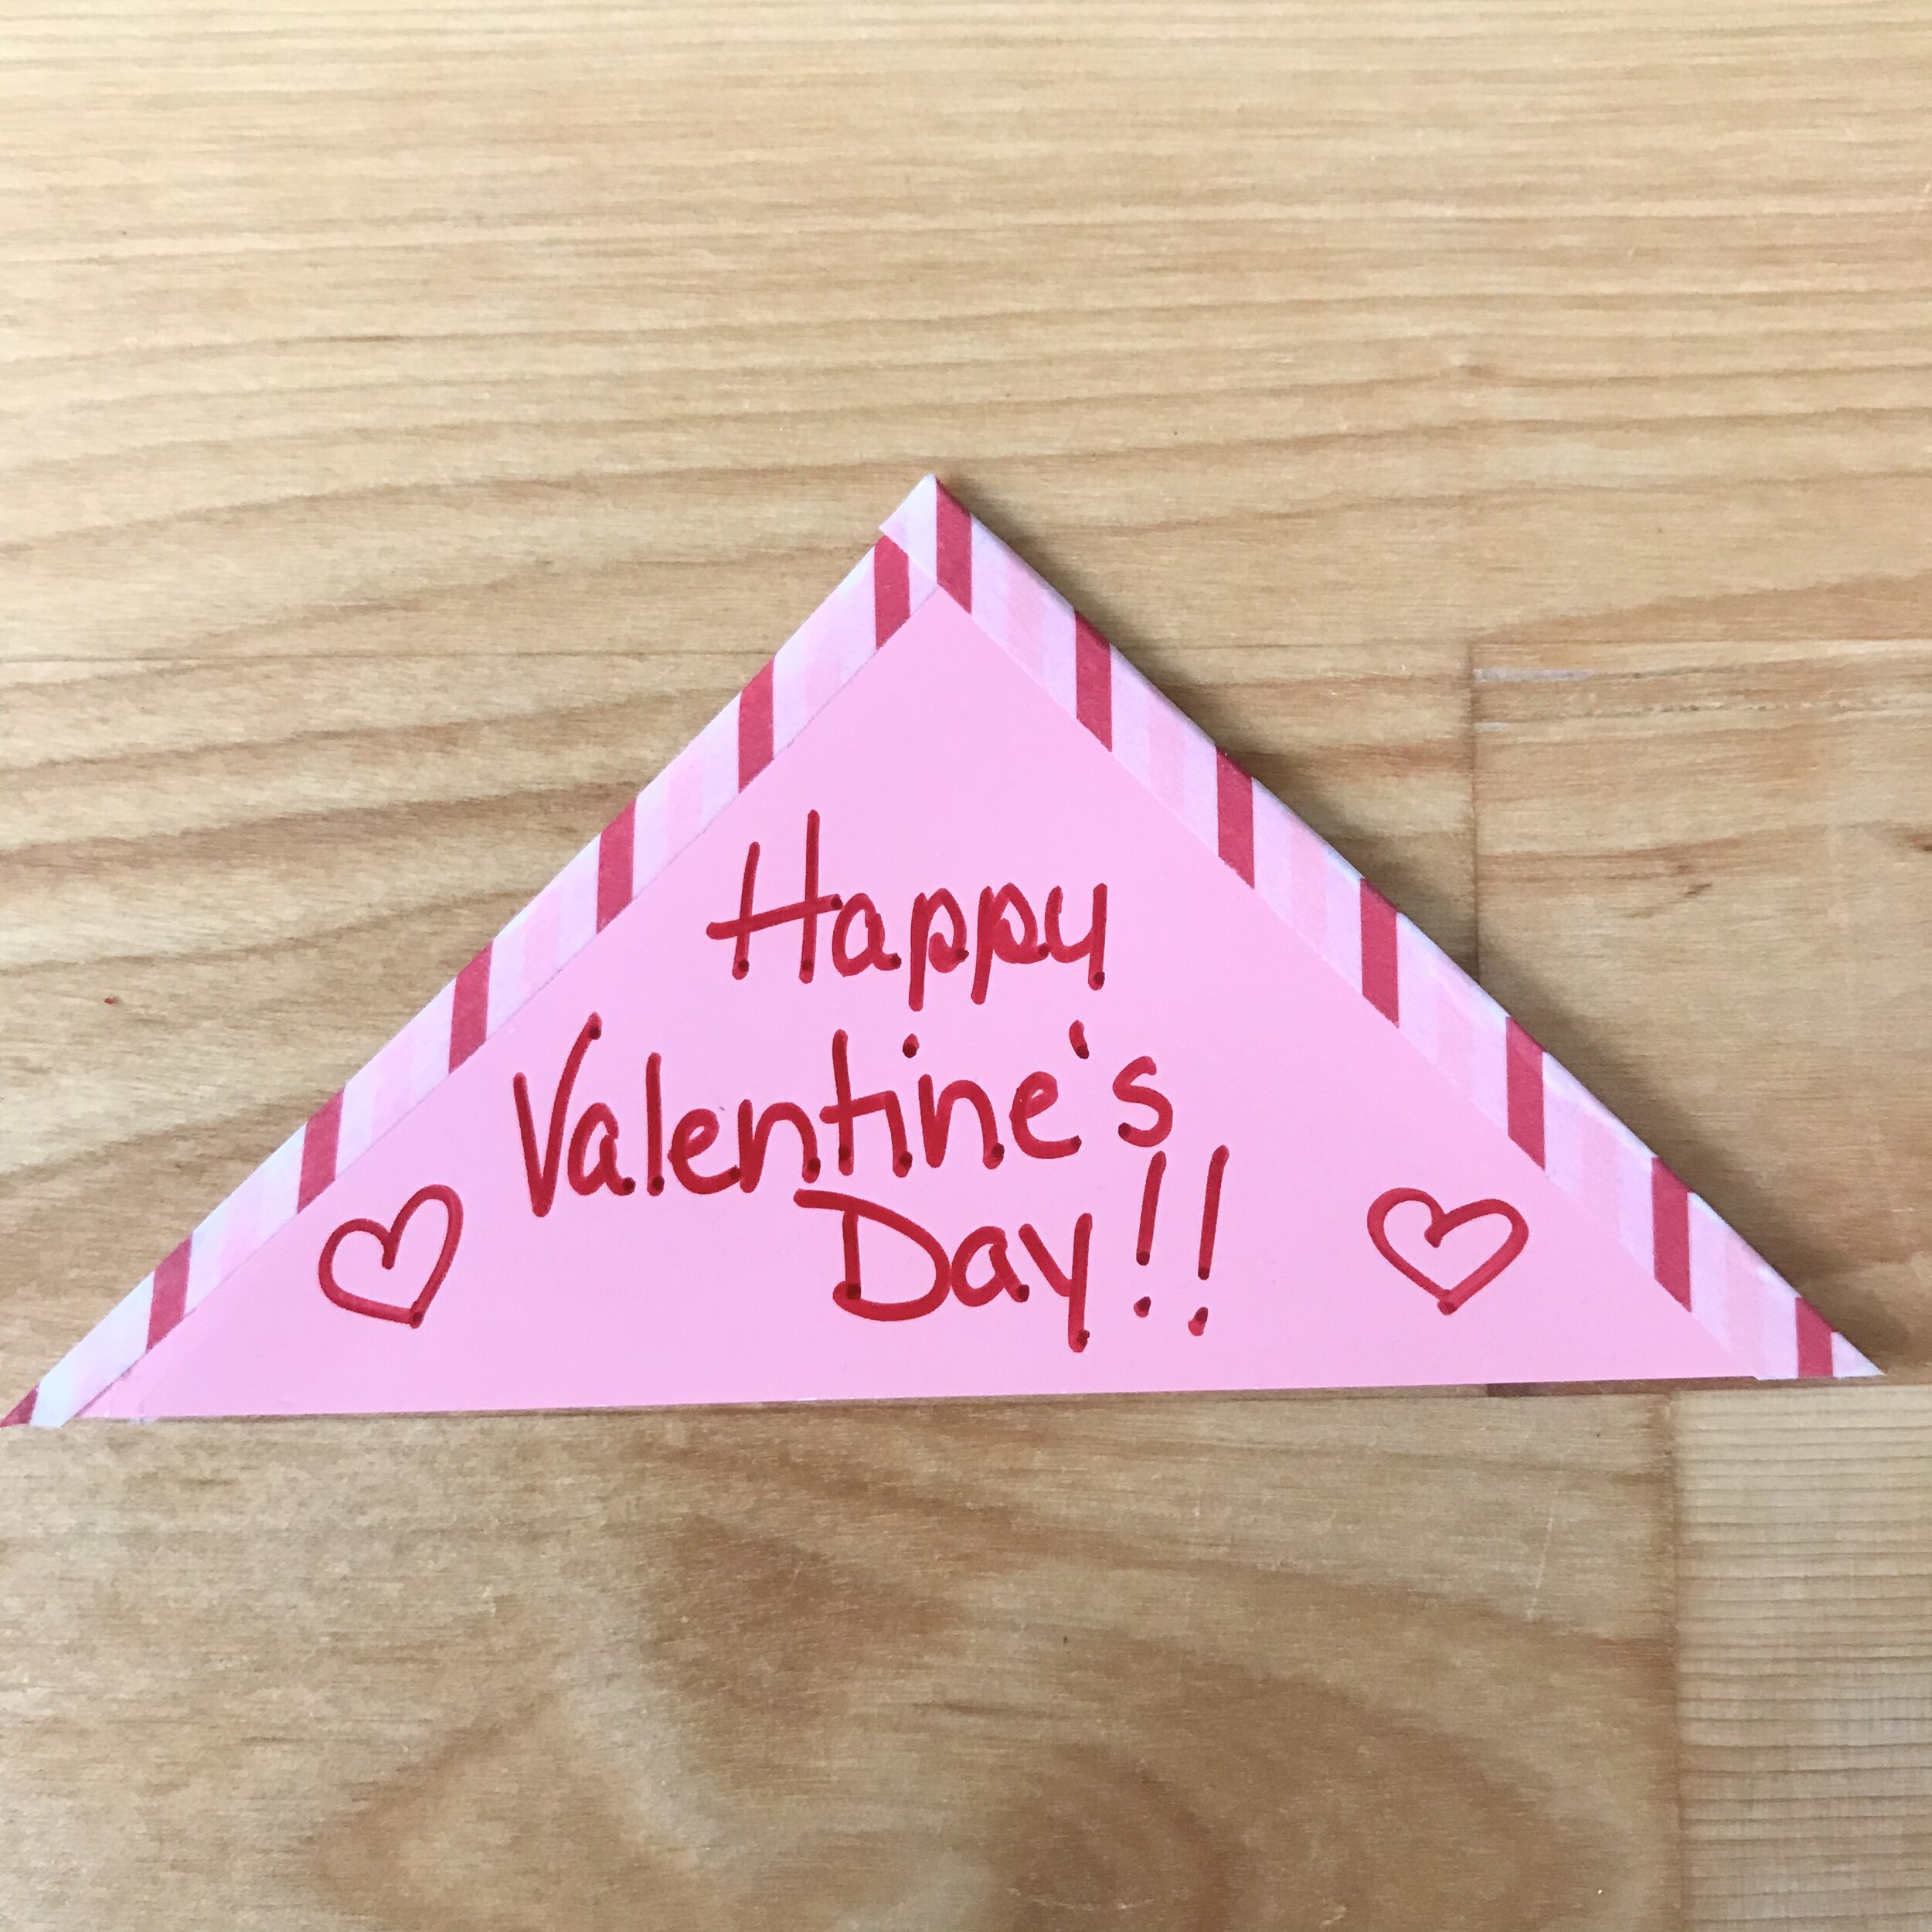 creative valentines for the class